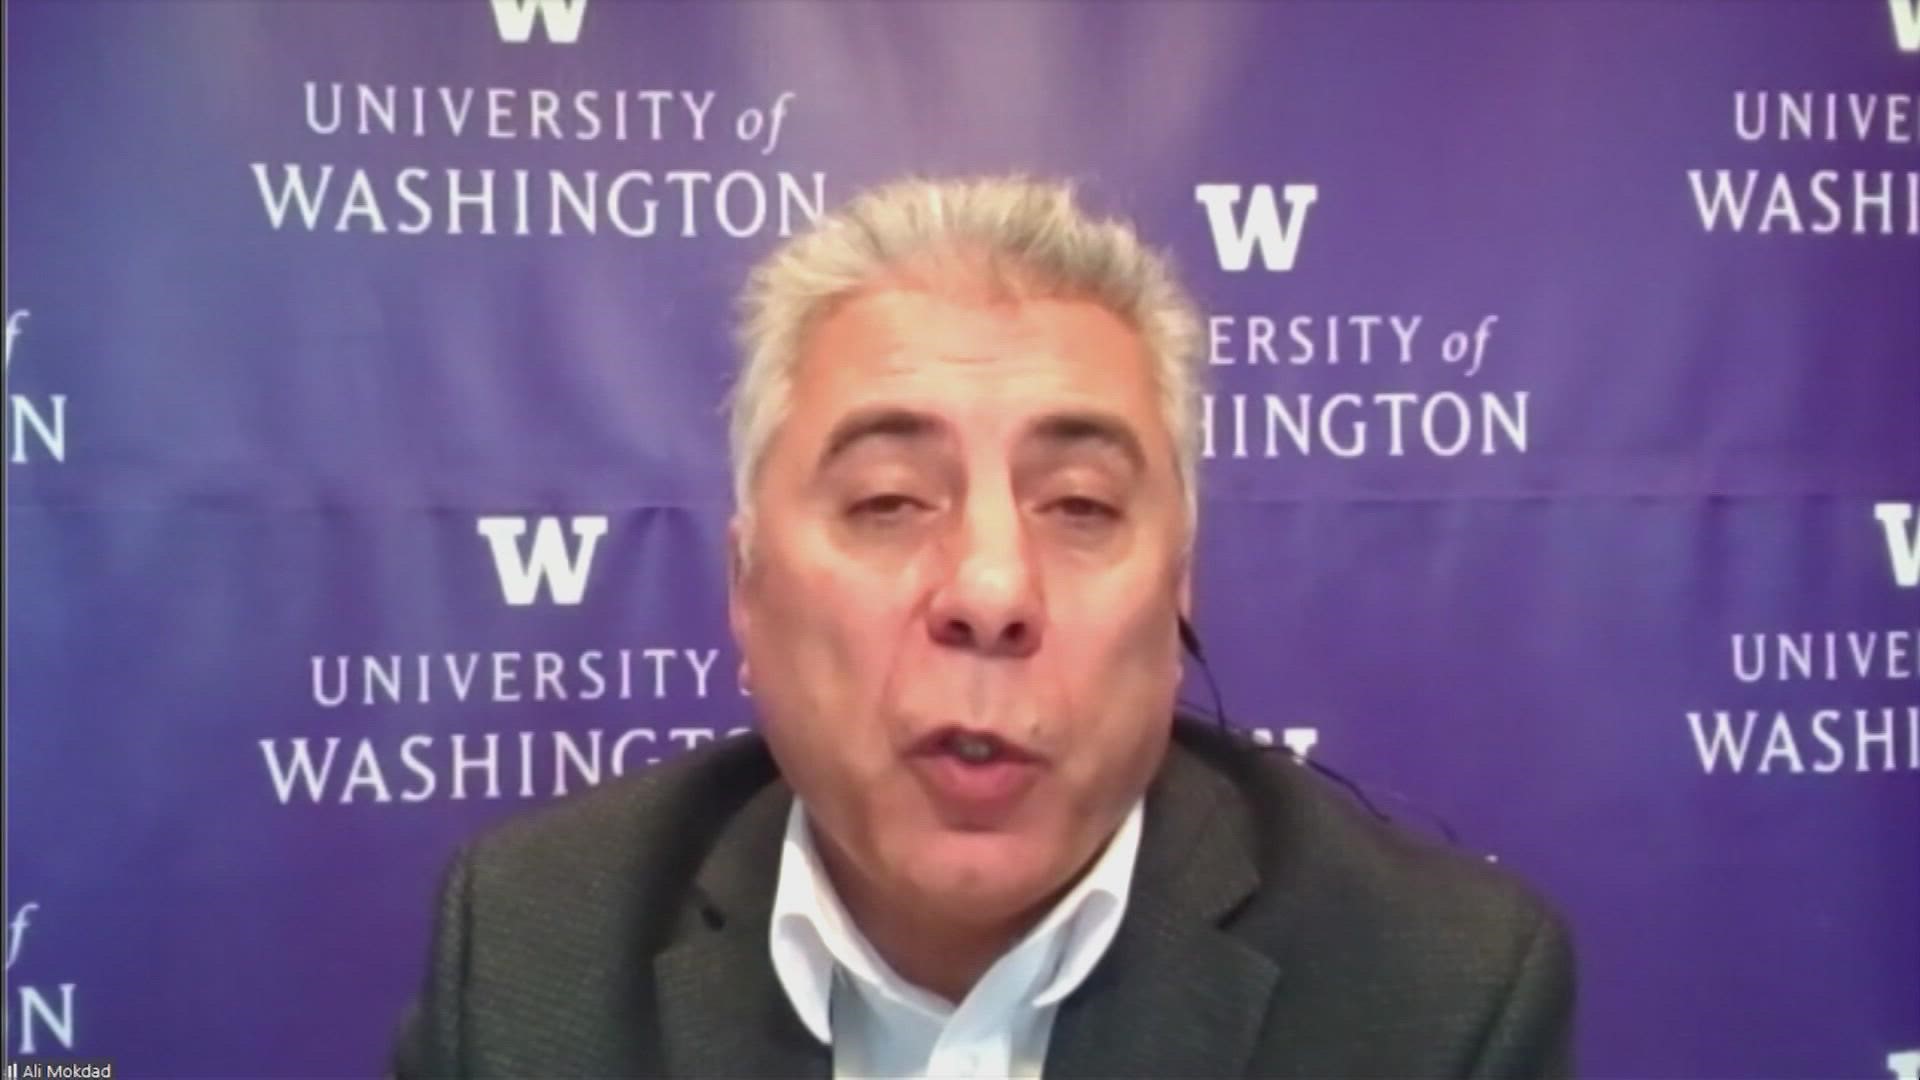 Dr. Ali Mokdad, an epidemiologist at the UW School of Medicine, discusses when we could see cases decline.